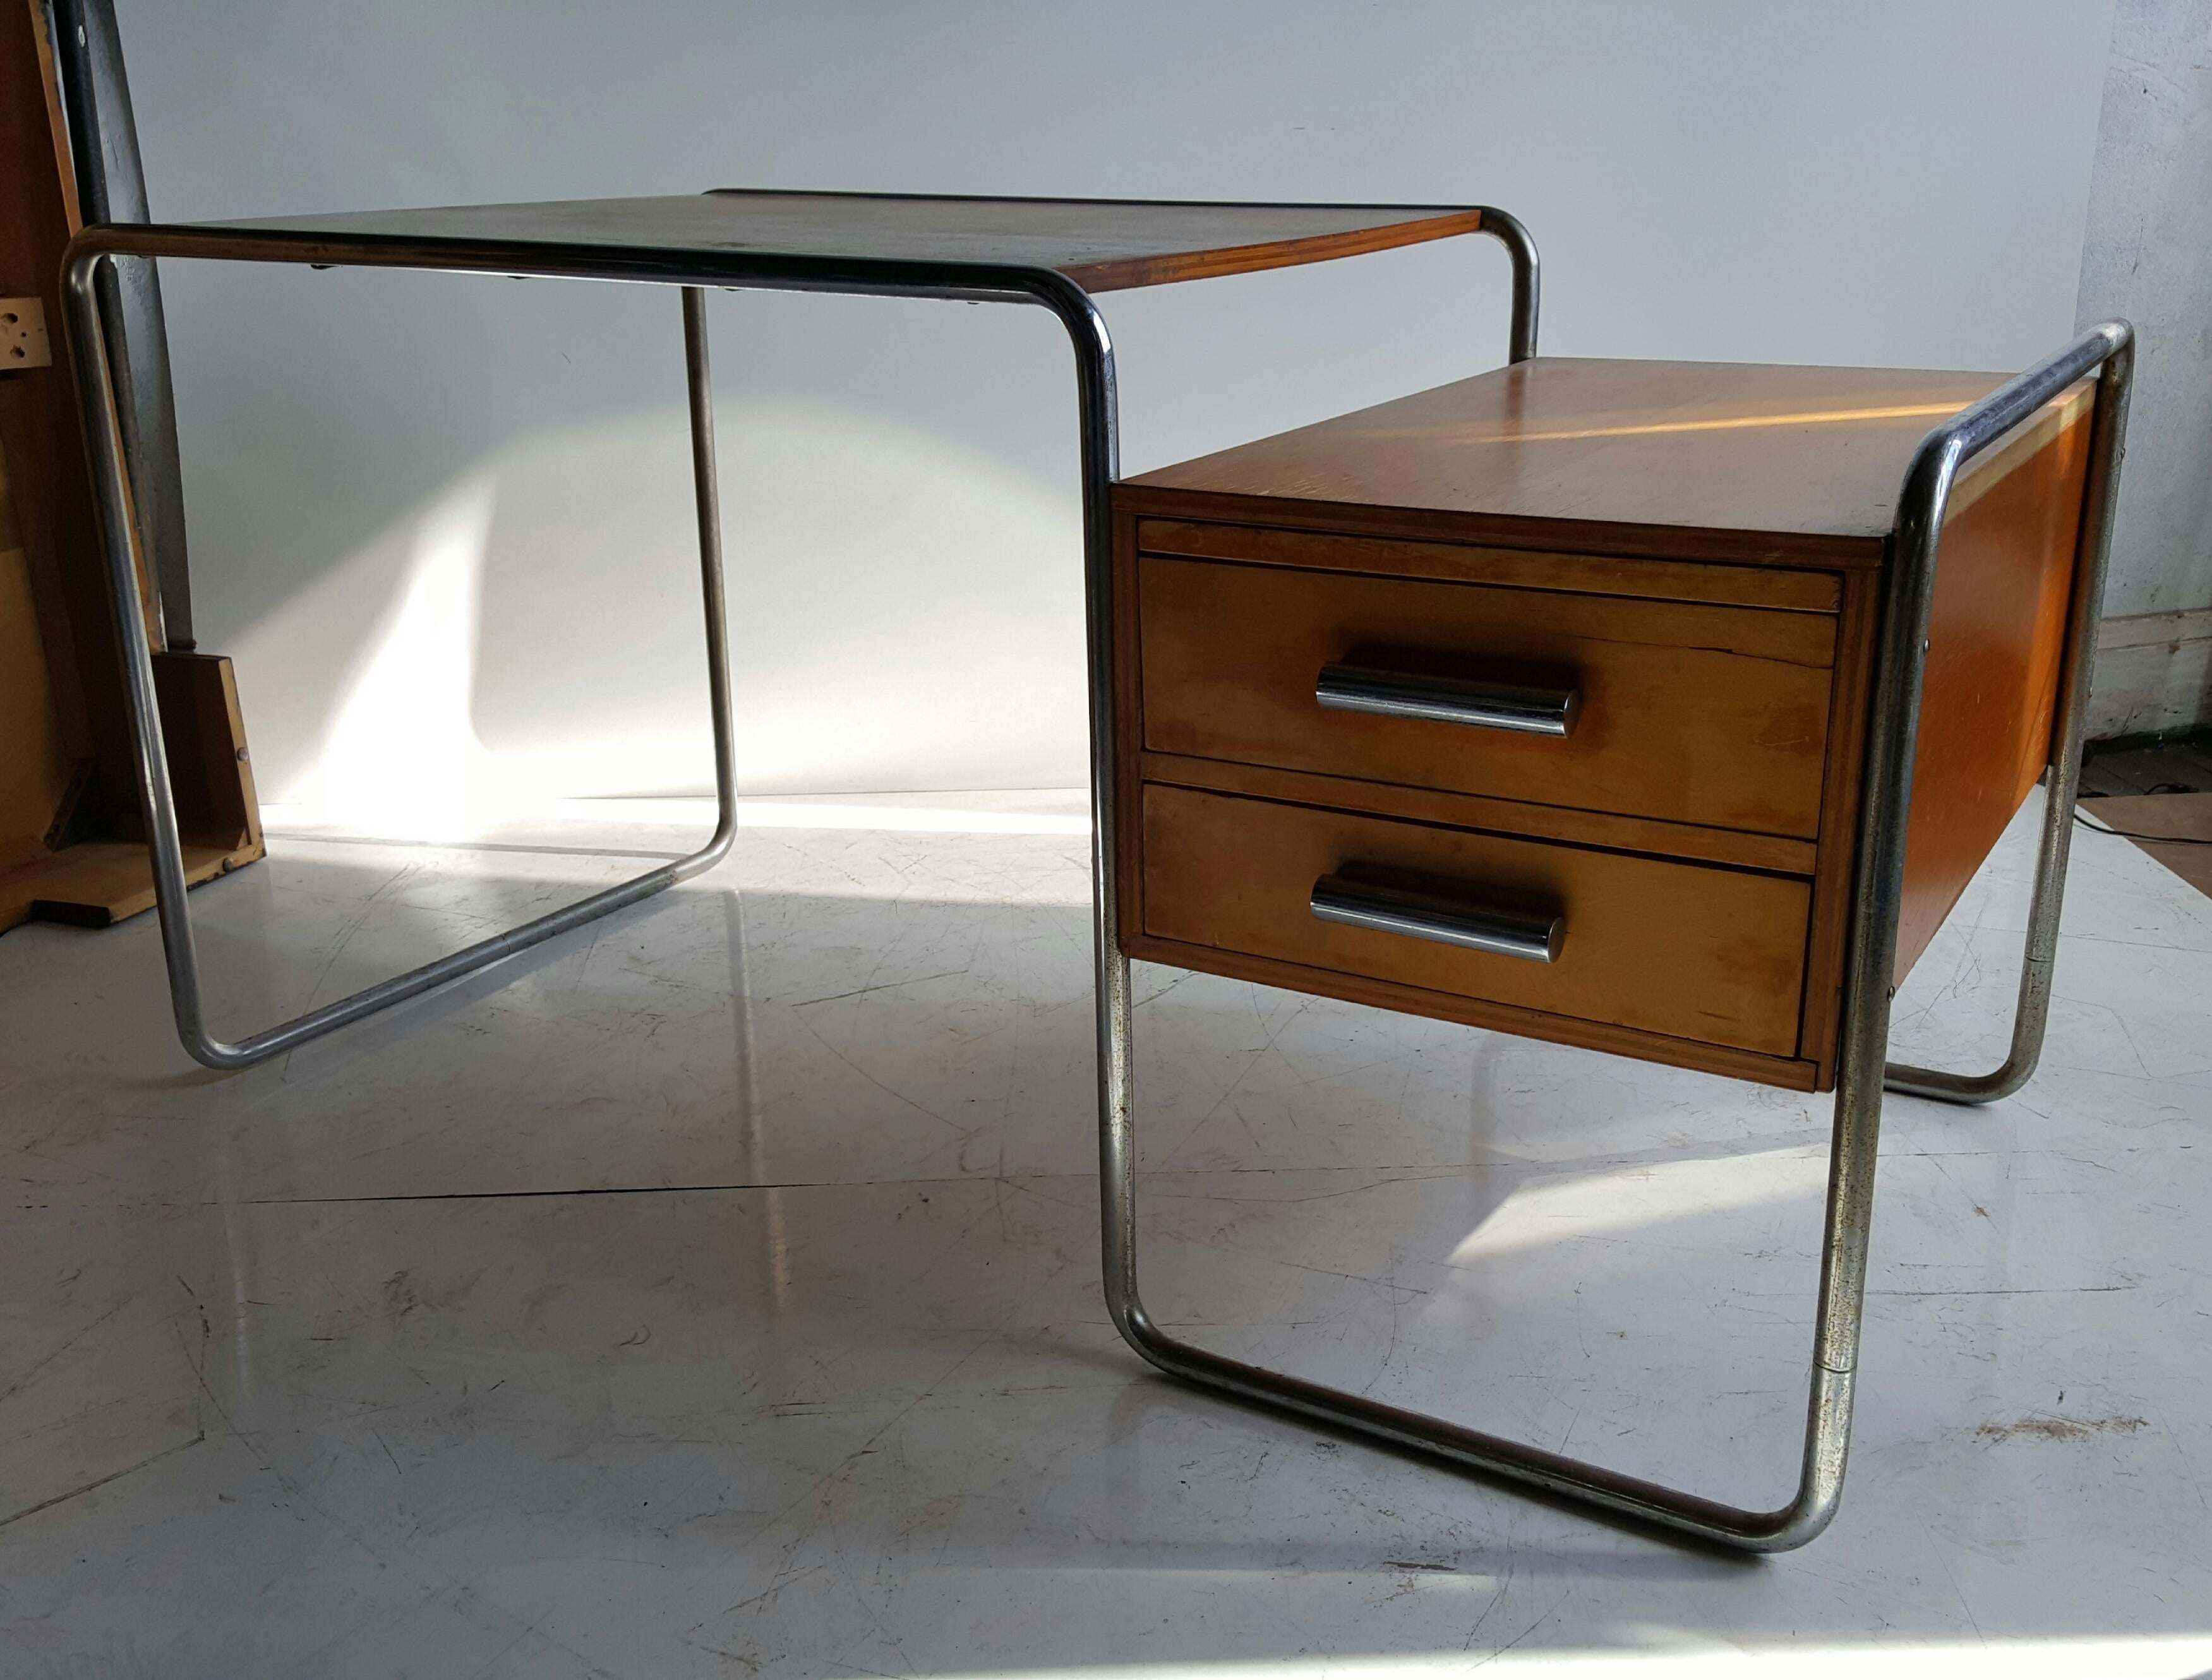 Designed by the Bauhaus architect Marcel Breuer in 1935, this desk shows very well the functional Design of the Bauhaus School. The desk in ash with visible wood texture was produced by Thonet in the 1930s. Seldom seen version. Early example, nickel